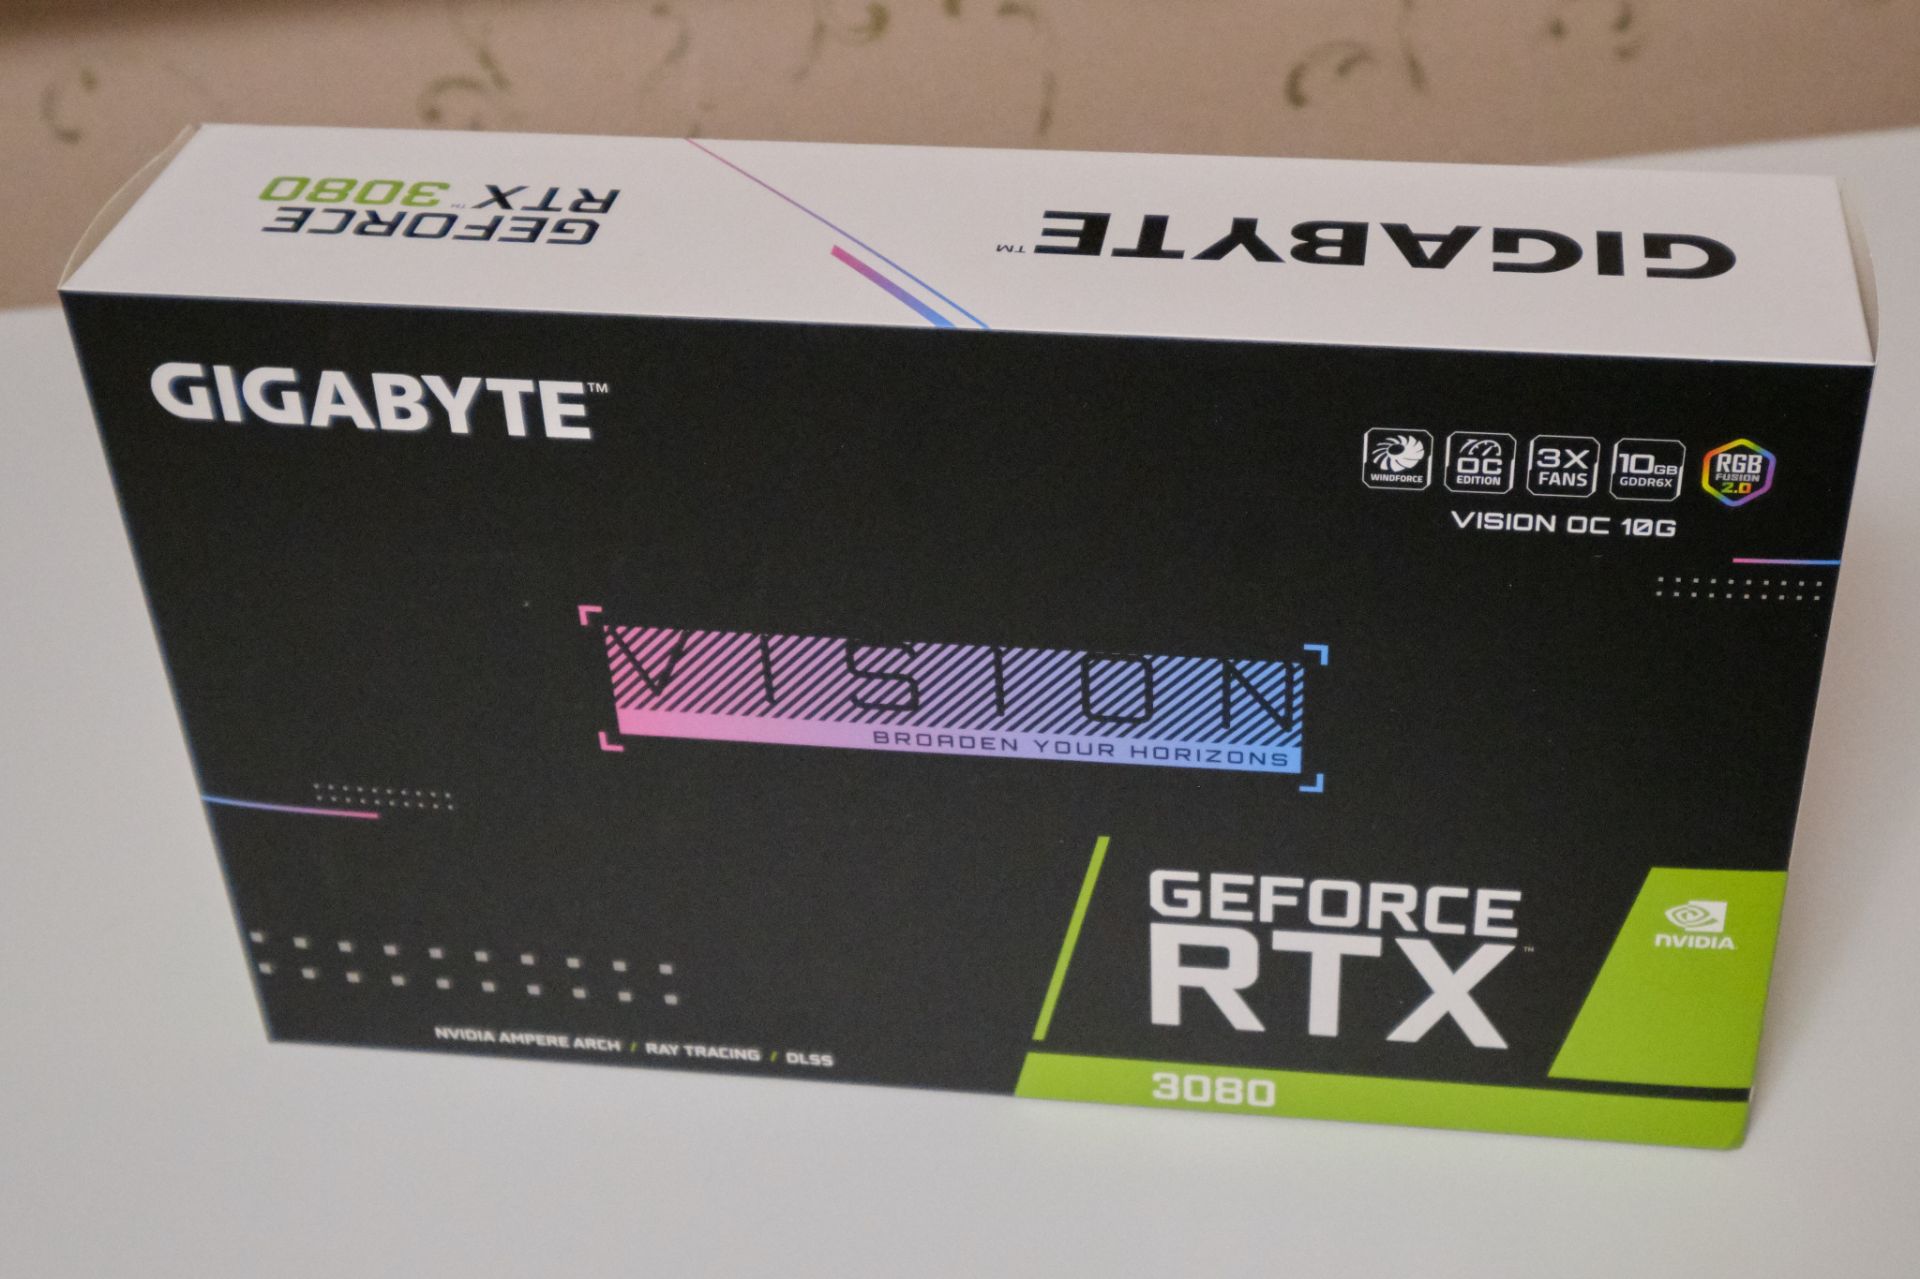 Review on GIGABYTE GeForce RTX 3080 VISION OC 10GB – Tiny Reviews